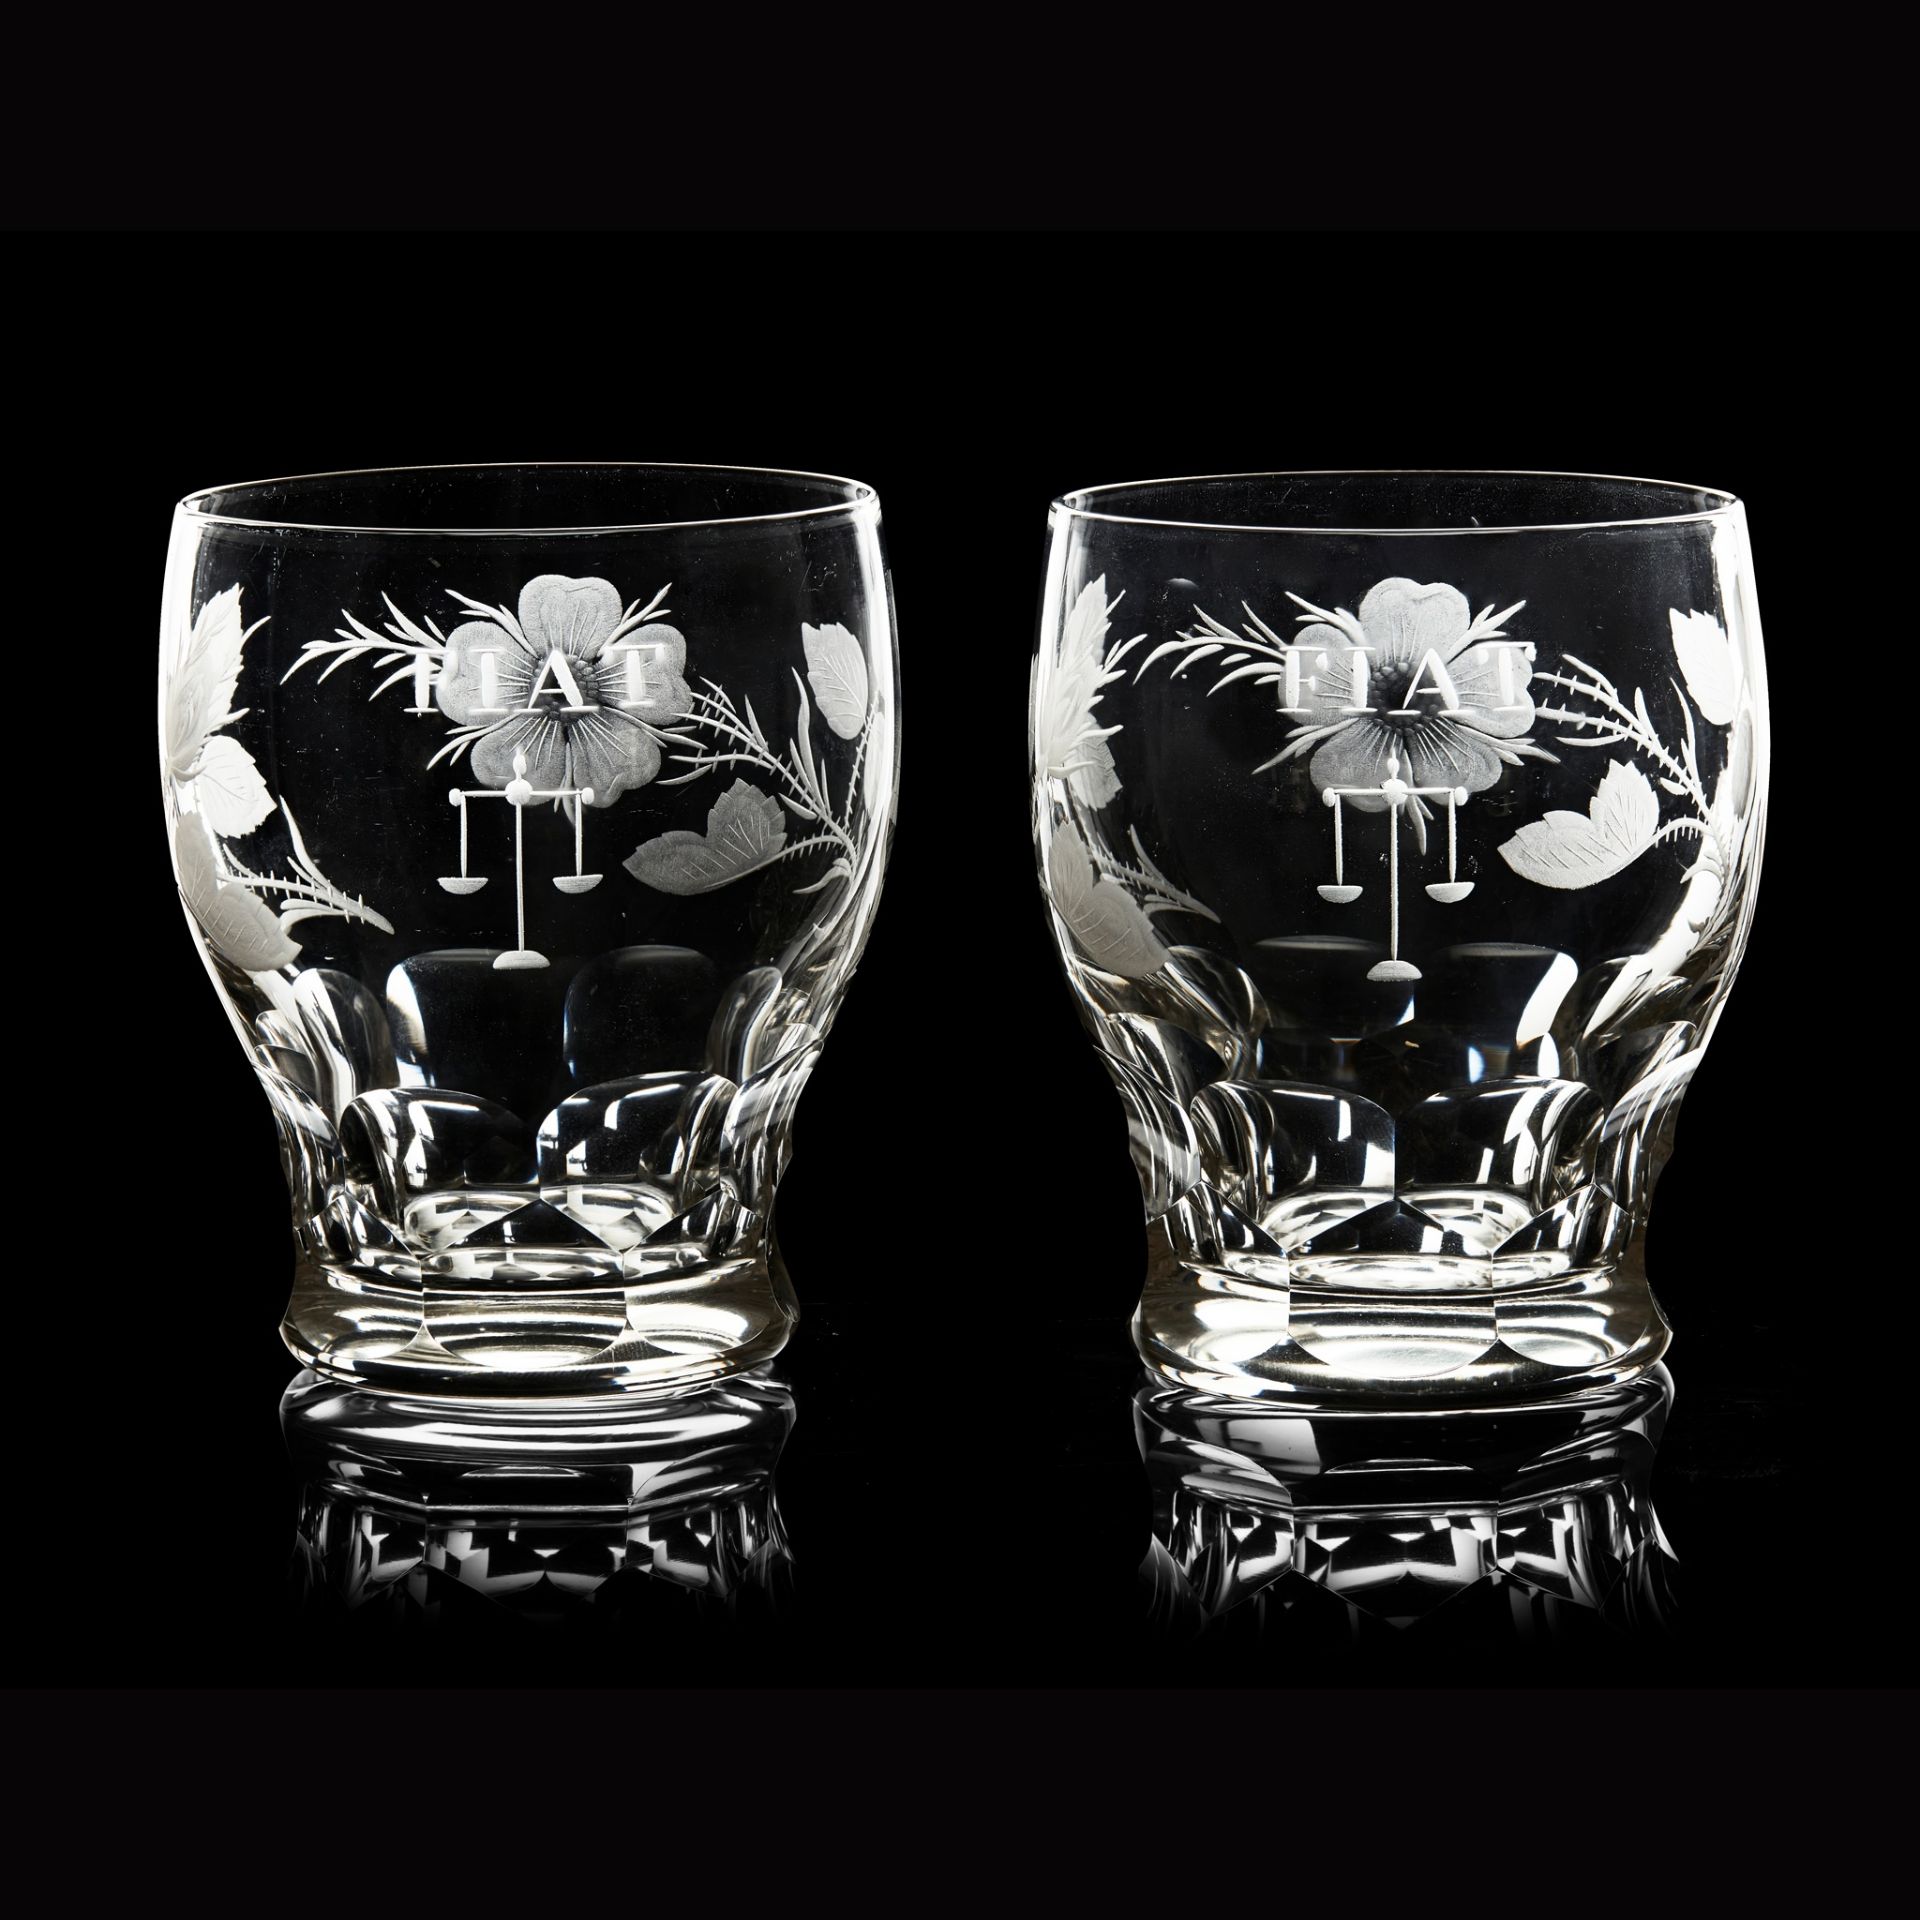 AN UNUSUAL PAIR OF JACOBITE GLASS TUMBLERS EARLY 19TH CENTURY - Image 2 of 2